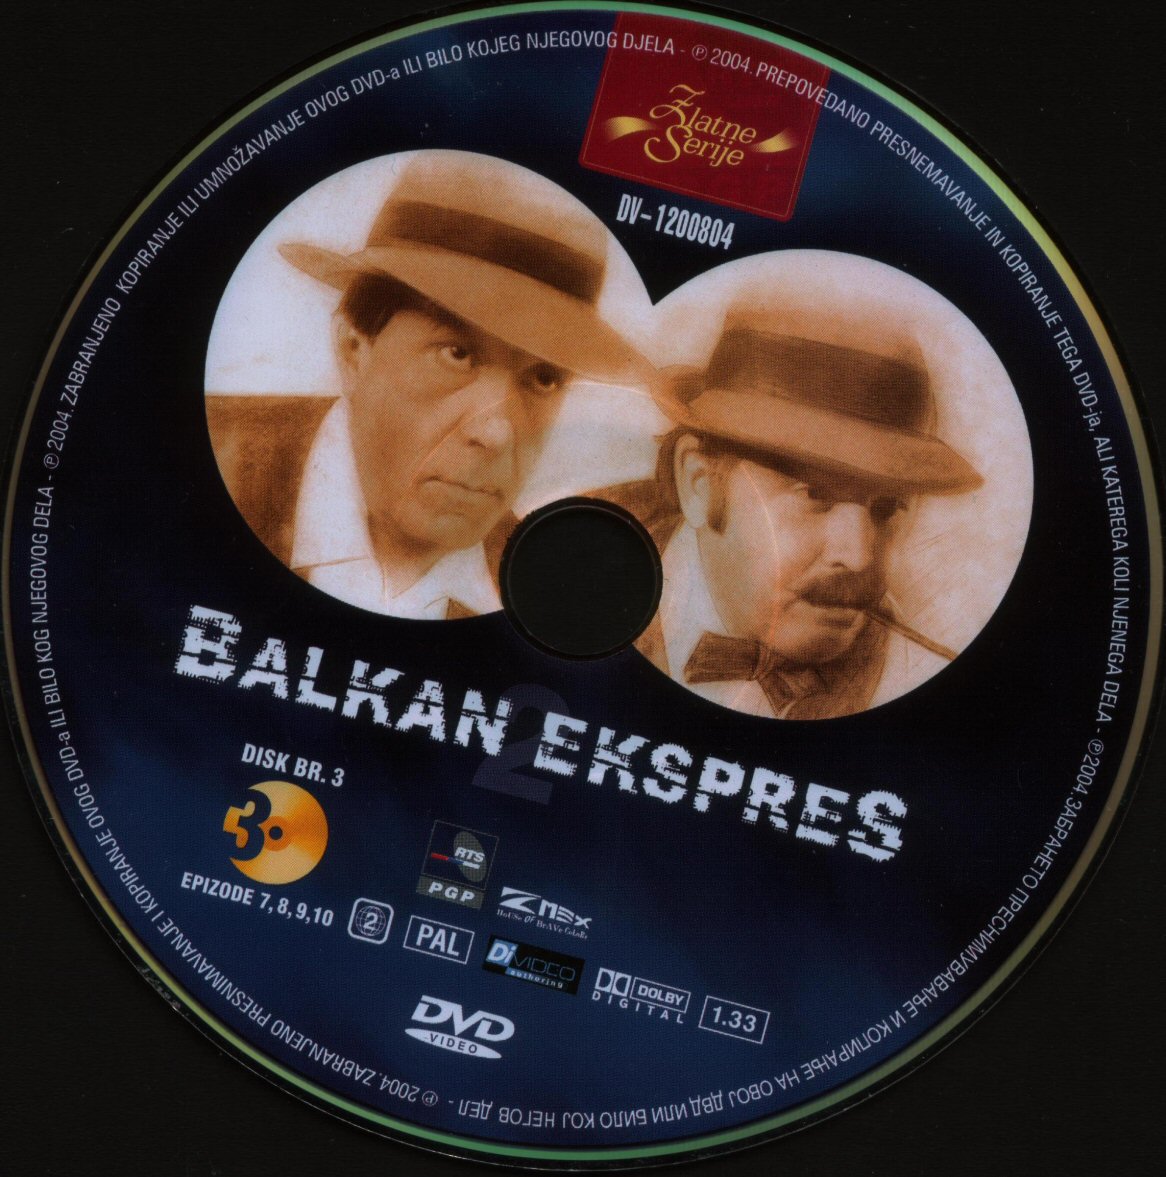 Click to view full size image -  DVD Cover - B - DVD - BALKAN EXSPRES - SERIJE - CD3 - DVD - BALKAN EXSPRES - SERIJE - CD3.jpg